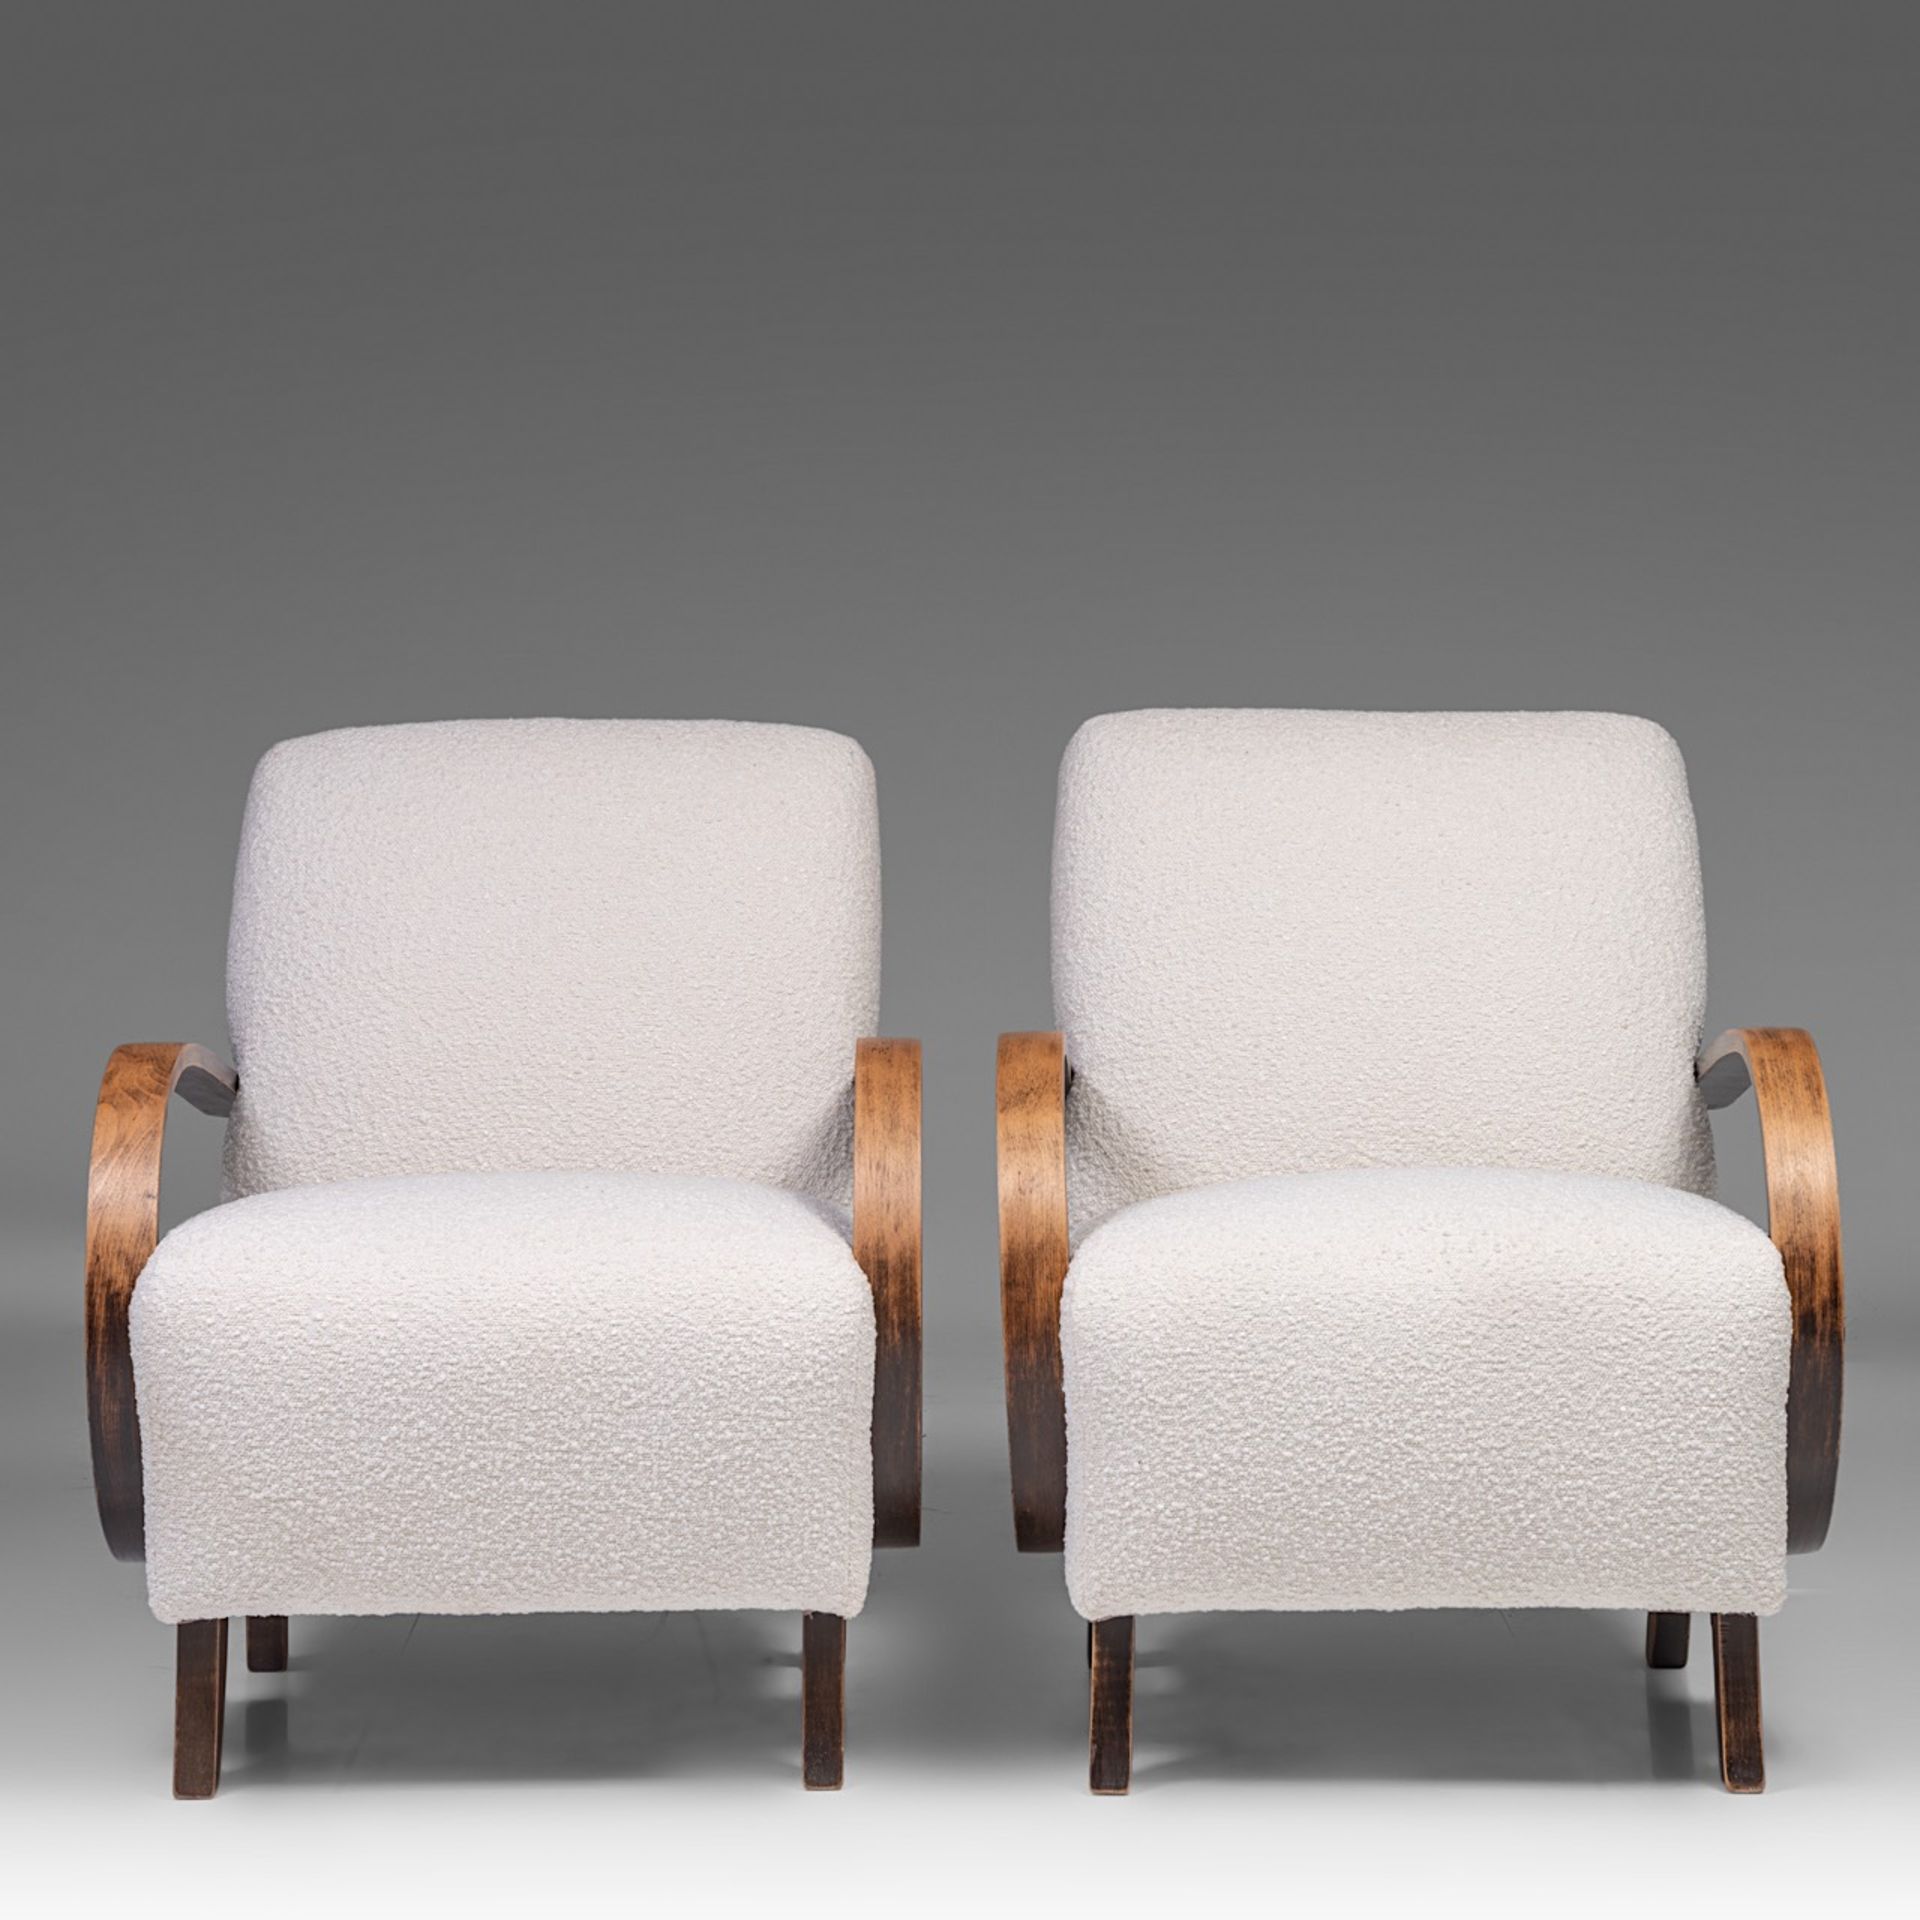 A pair of Mid-century Armchairs by Jindrich Halabala, 1950s 83 x 68 x 87 cm. (32.6 x 26.7 x 34 1/4 i - Image 3 of 13